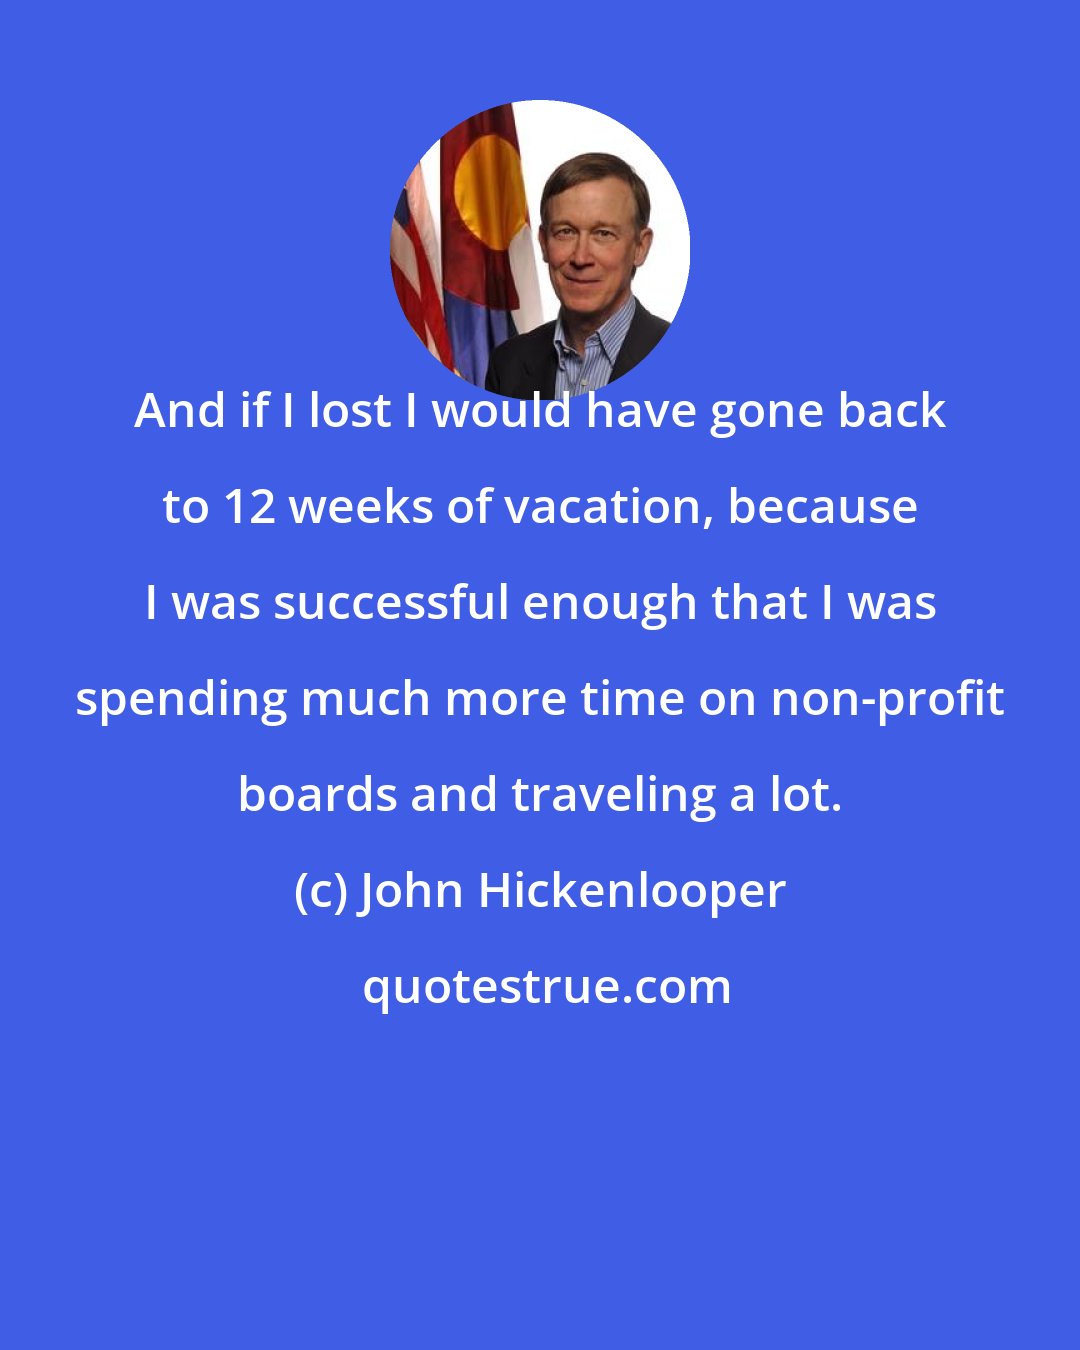 John Hickenlooper: And if I lost I would have gone back to 12 weeks of vacation, because I was successful enough that I was spending much more time on non-profit boards and traveling a lot.